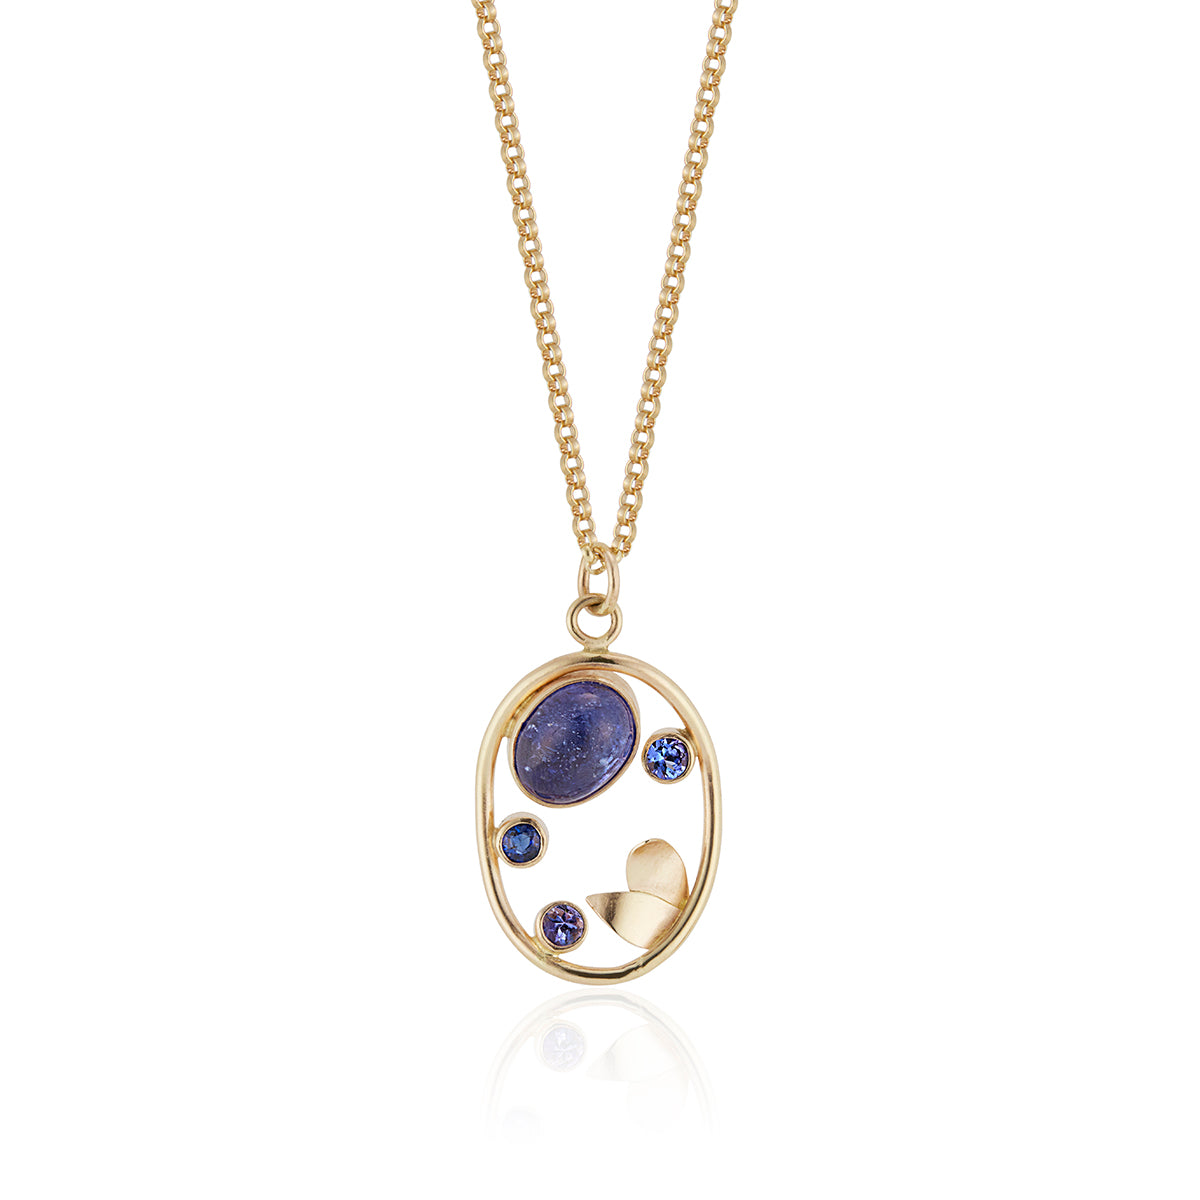 Tanzanite and sapphire stones set on a yellow gold pendant, photographed on a white background